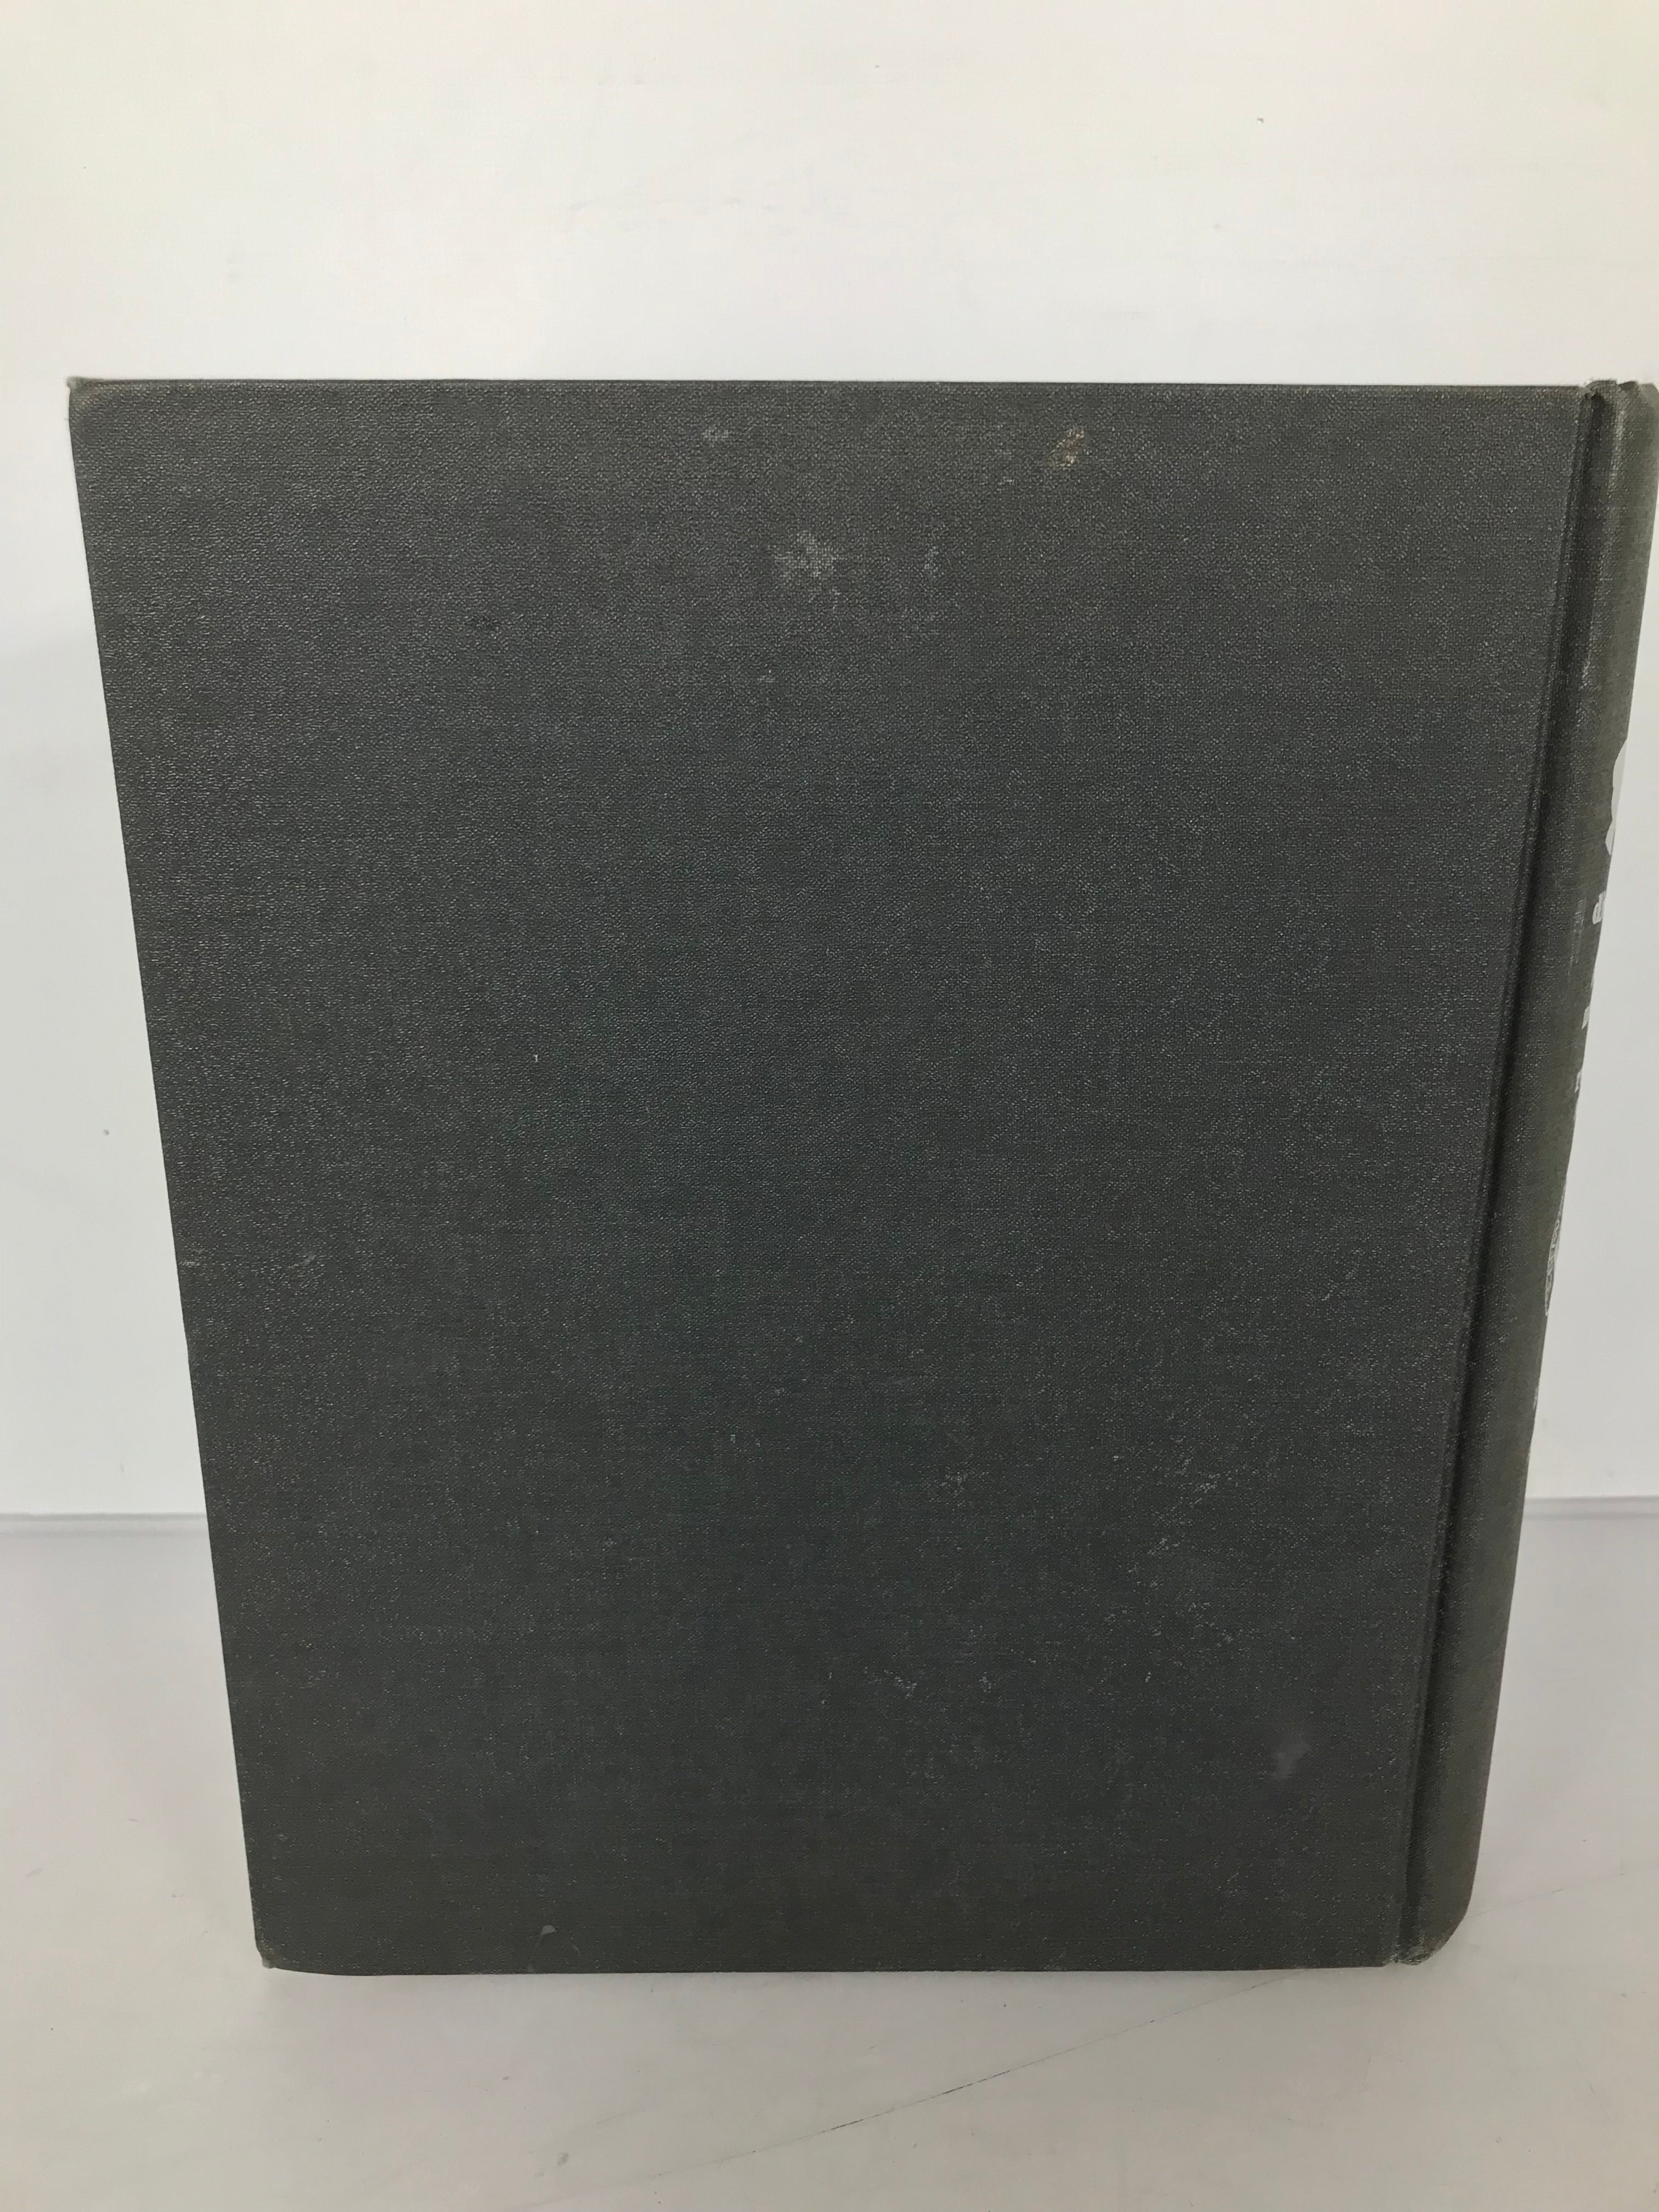 A Dictionary of Mining, Mineral, and Related Terms 1968